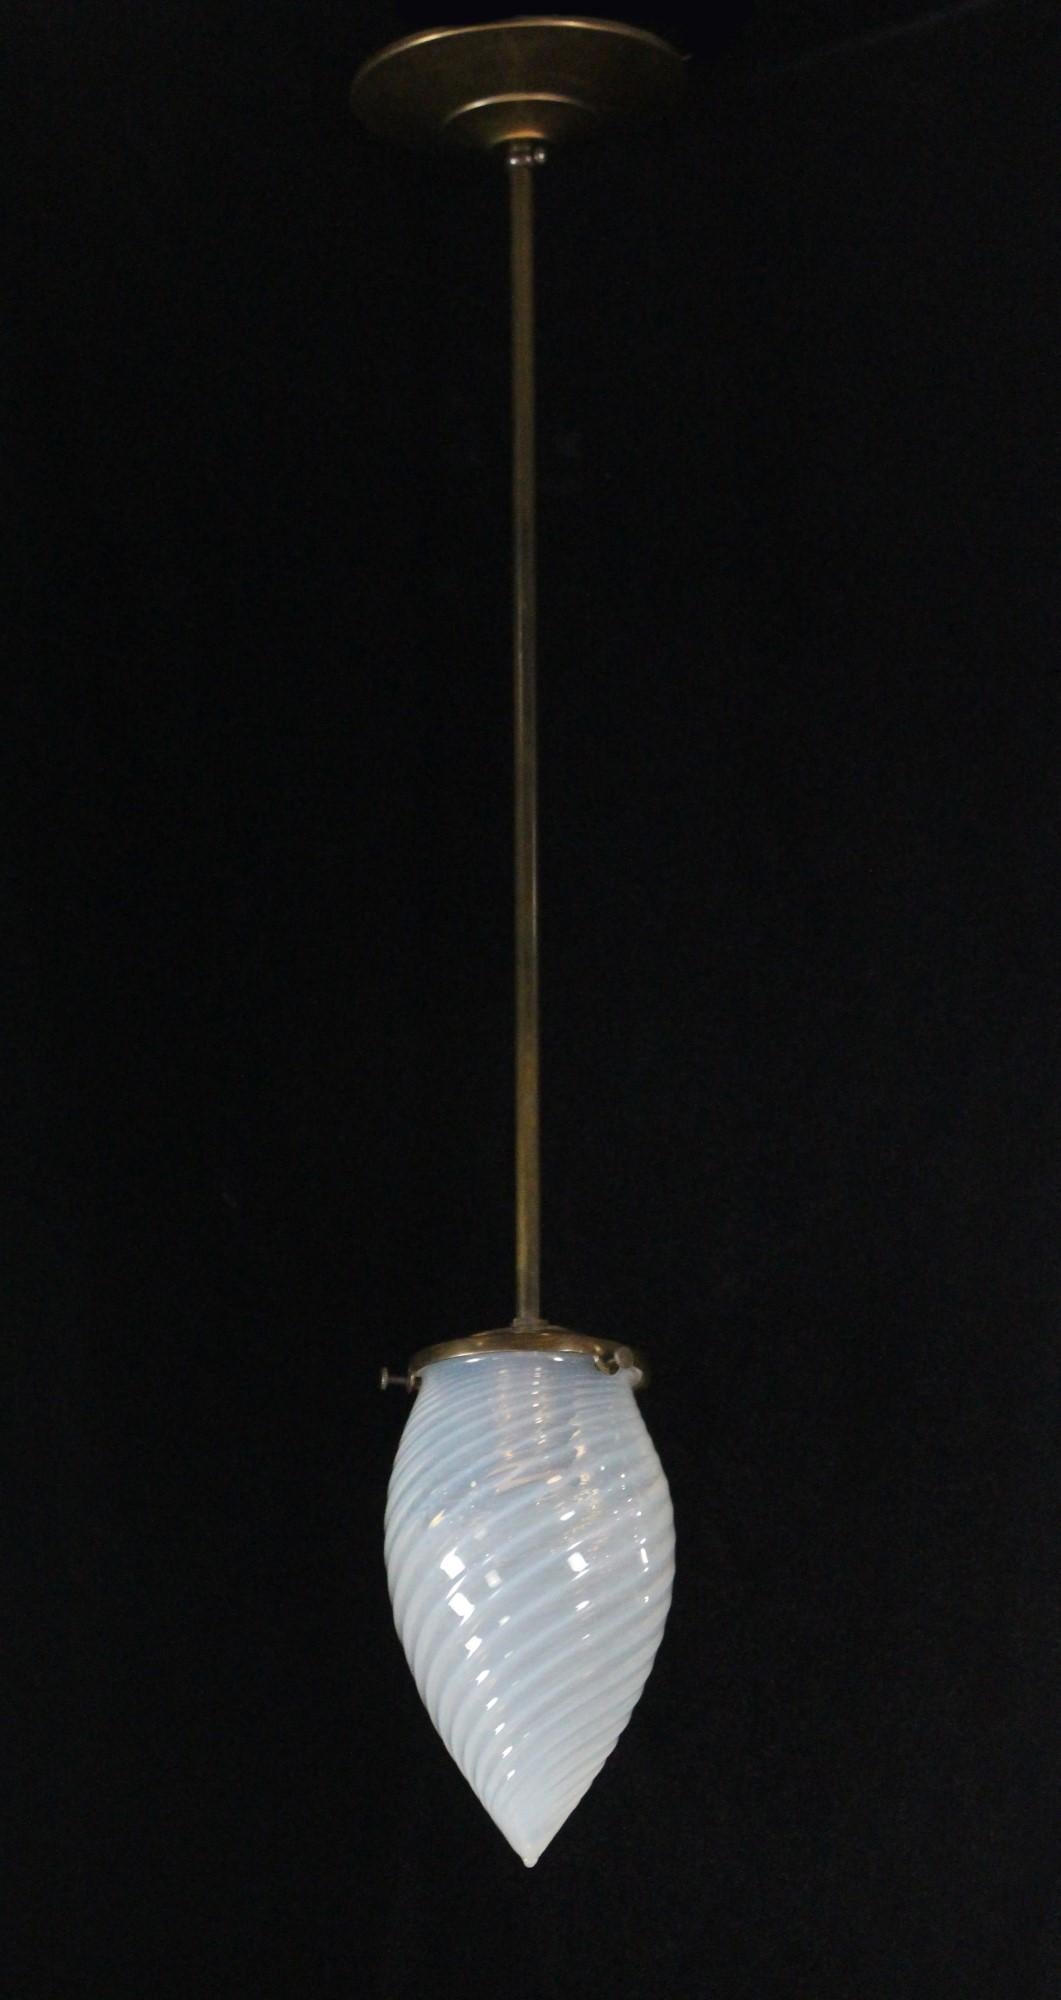 Antique petite hand blown opalescent glass pendant globe fitted with new brass pole and fitter. It has a teardrop shape with white swirls. Cleaned and rewired. Please note, this item is located in our Scranton, PA location.